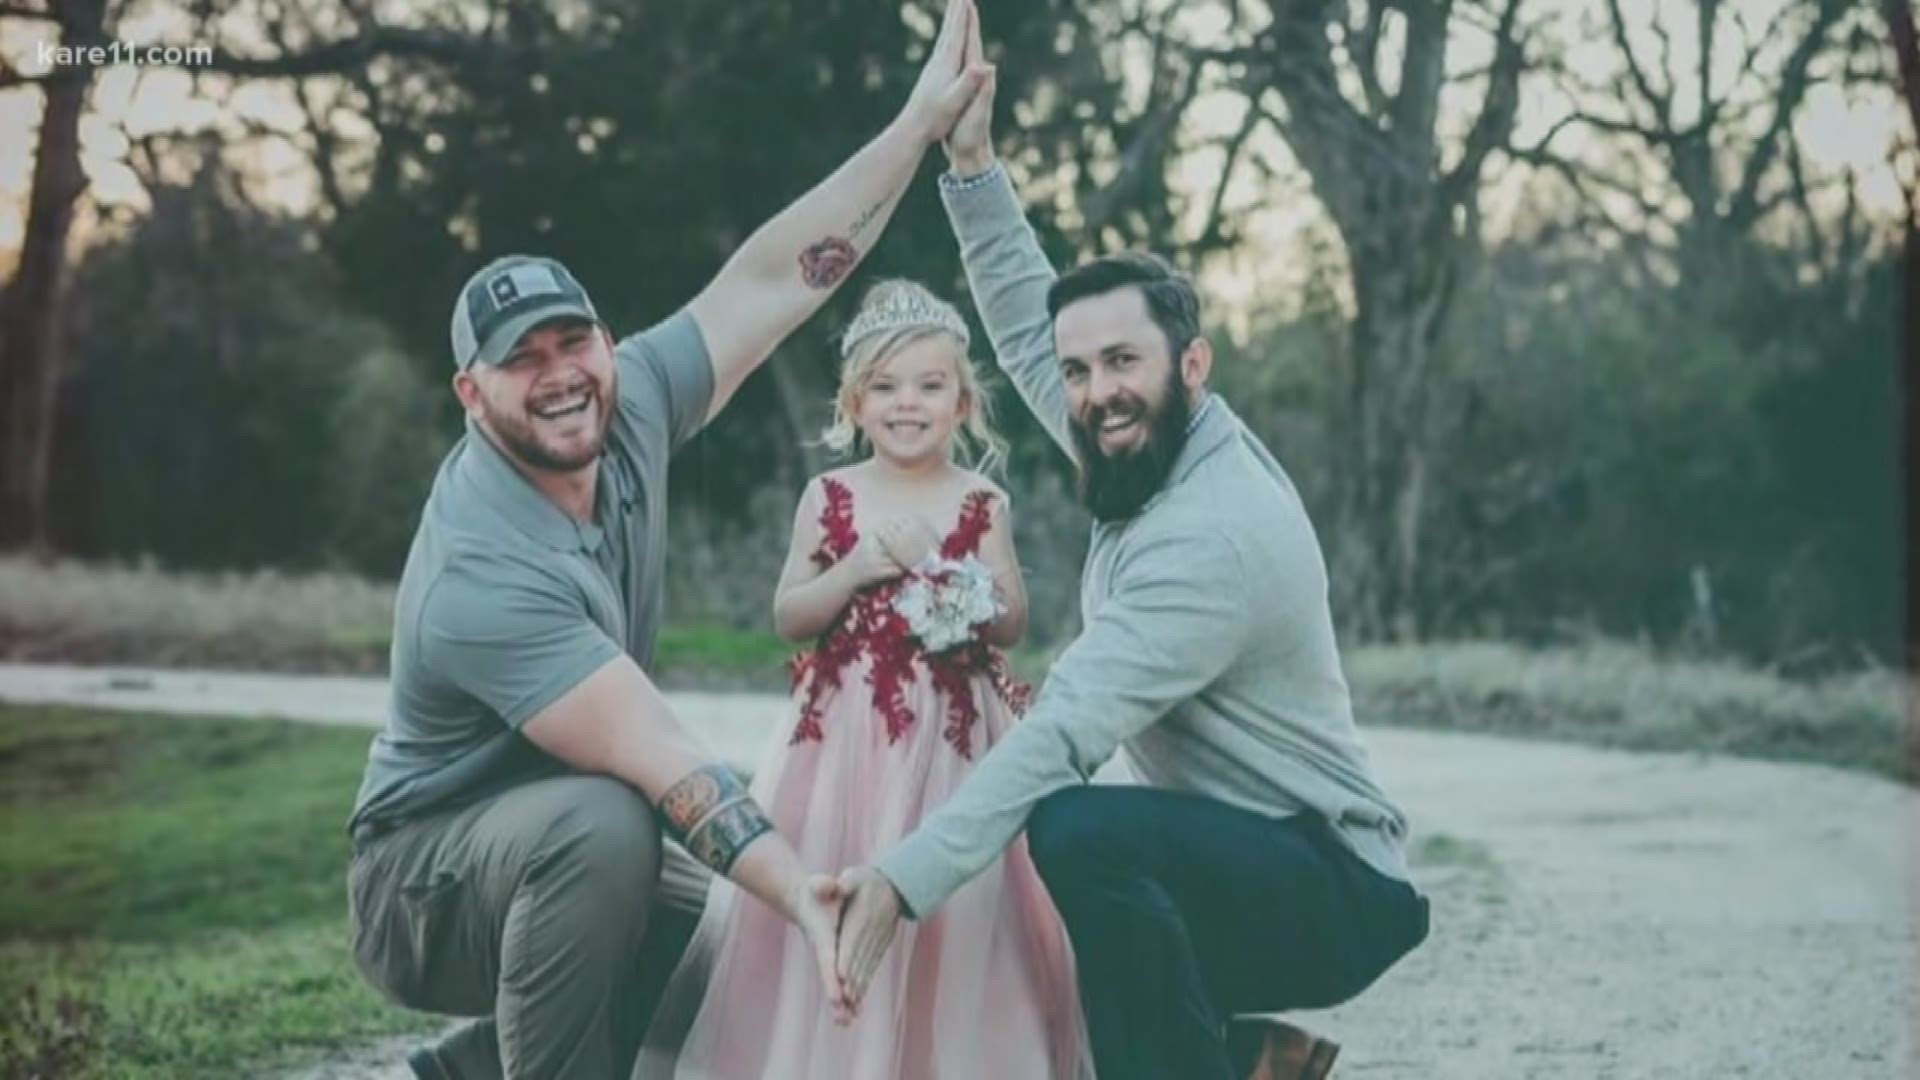 Happily ever after. It's the ending couples hope for but don't always get. And tonight a viral photo of a little girl pictured with her two fathers is showing us the power of love and creating healthy blended families.